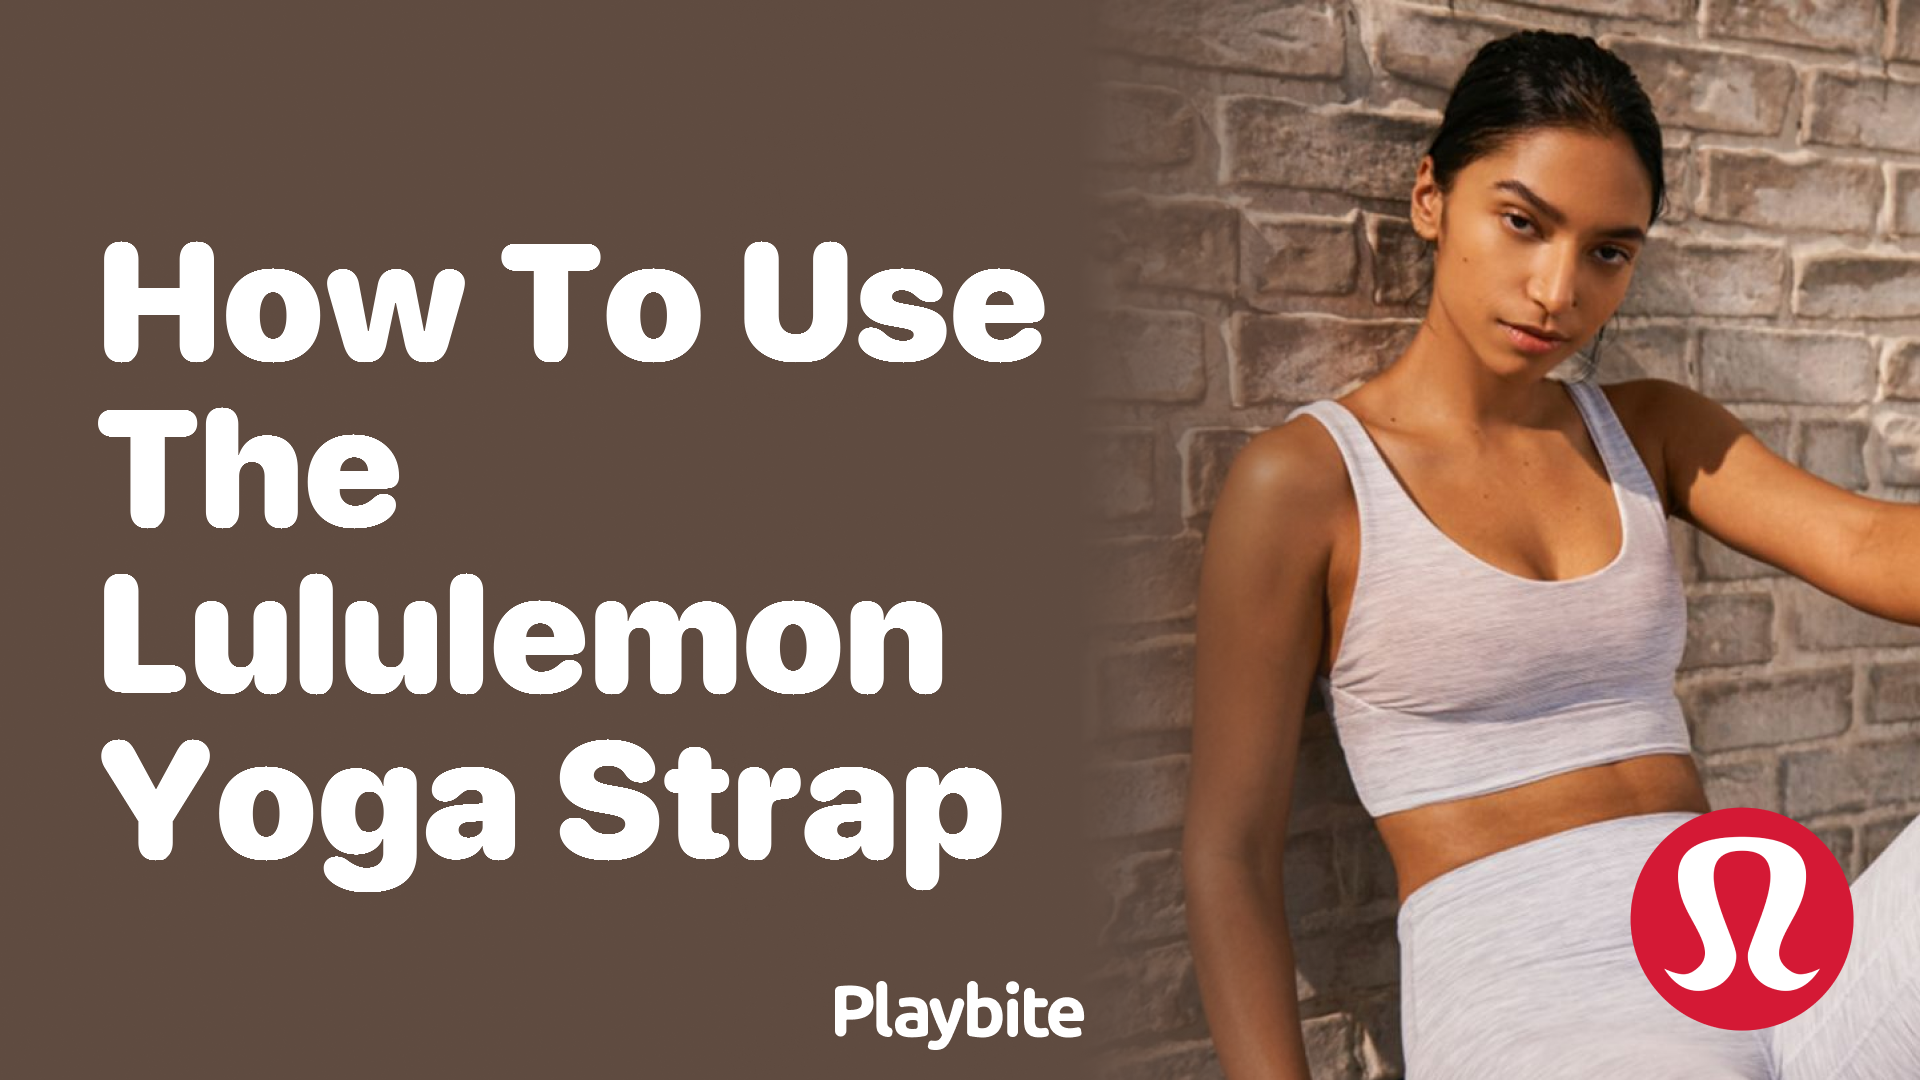 How to Use the Lululemon Yoga Strap for Your Practice - Playbite